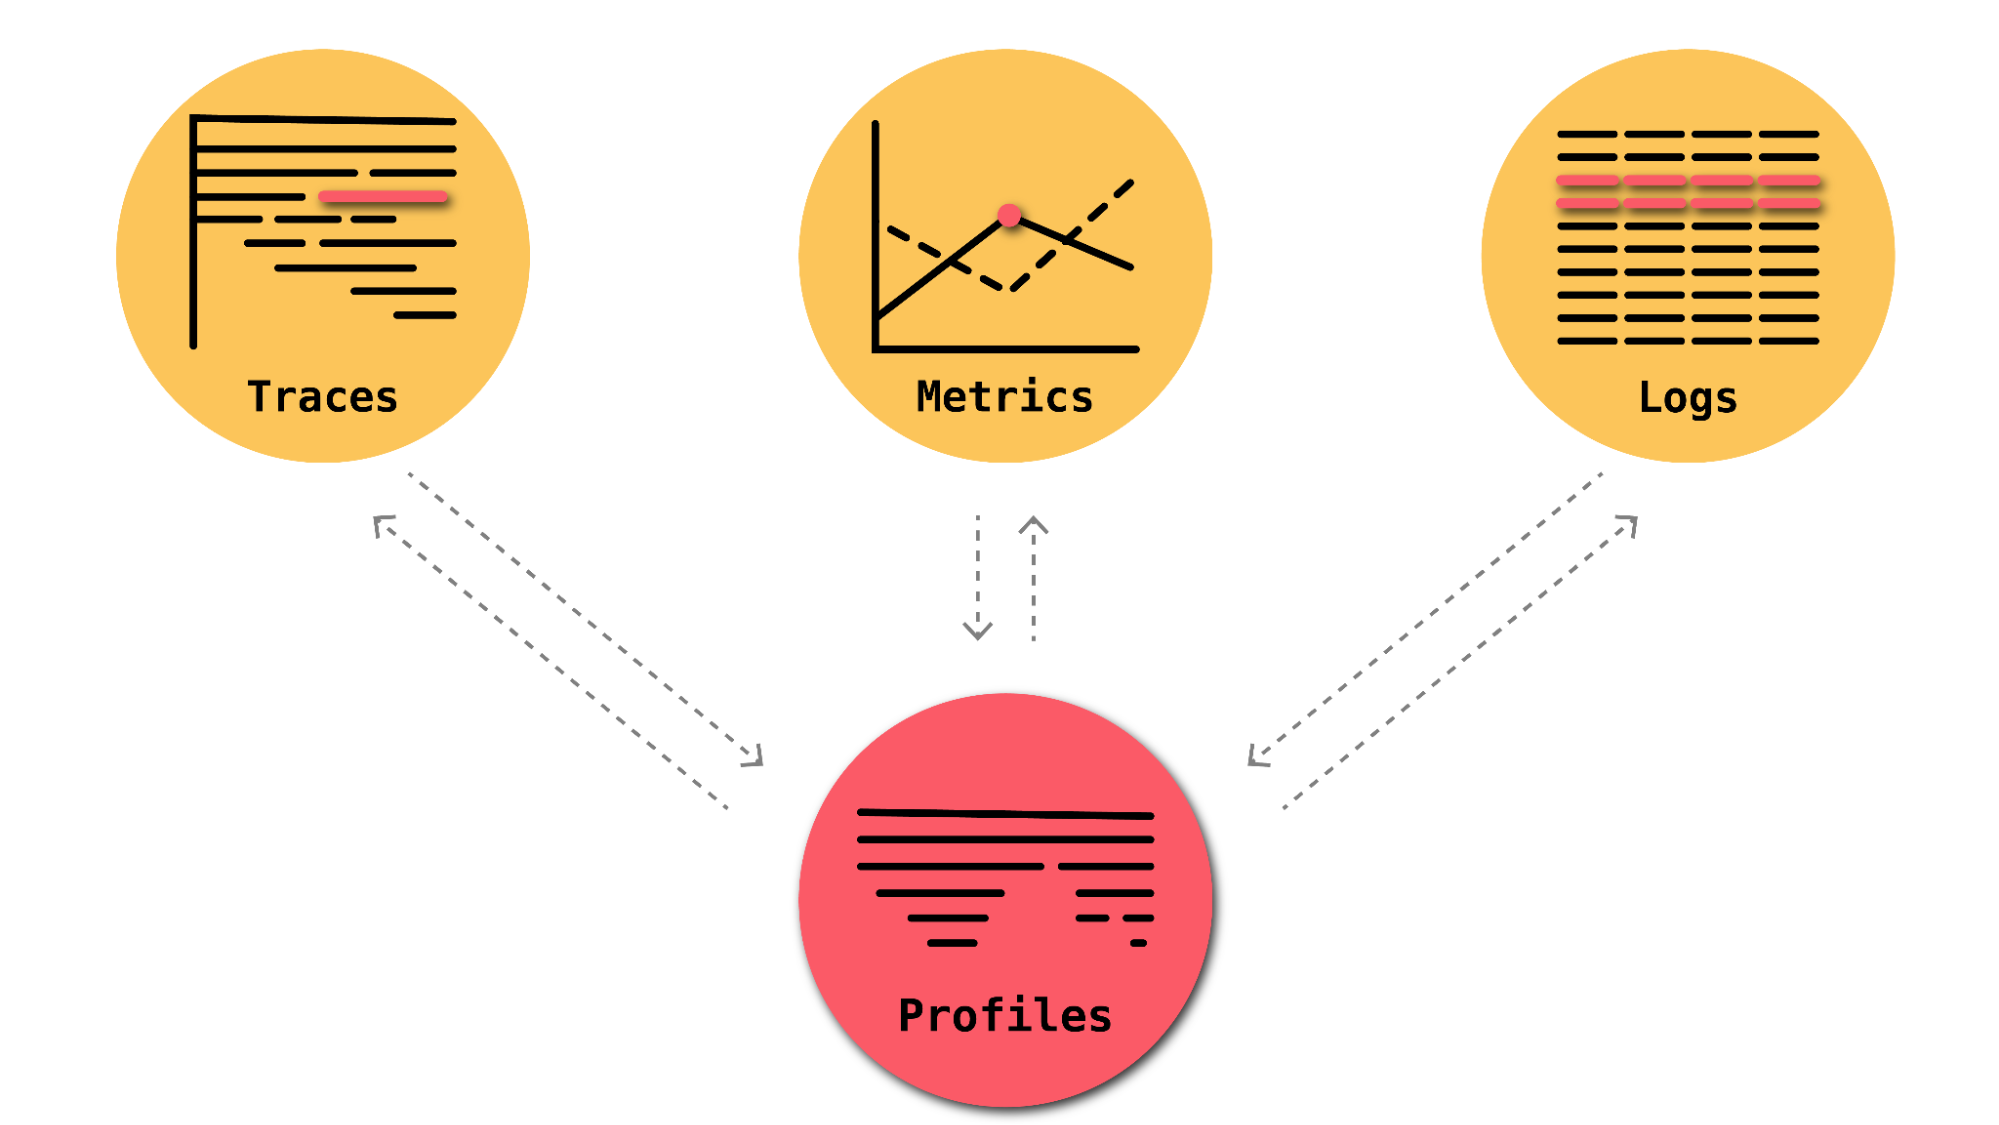 Diagram showing how traces, logs, metrics, work with profiles.